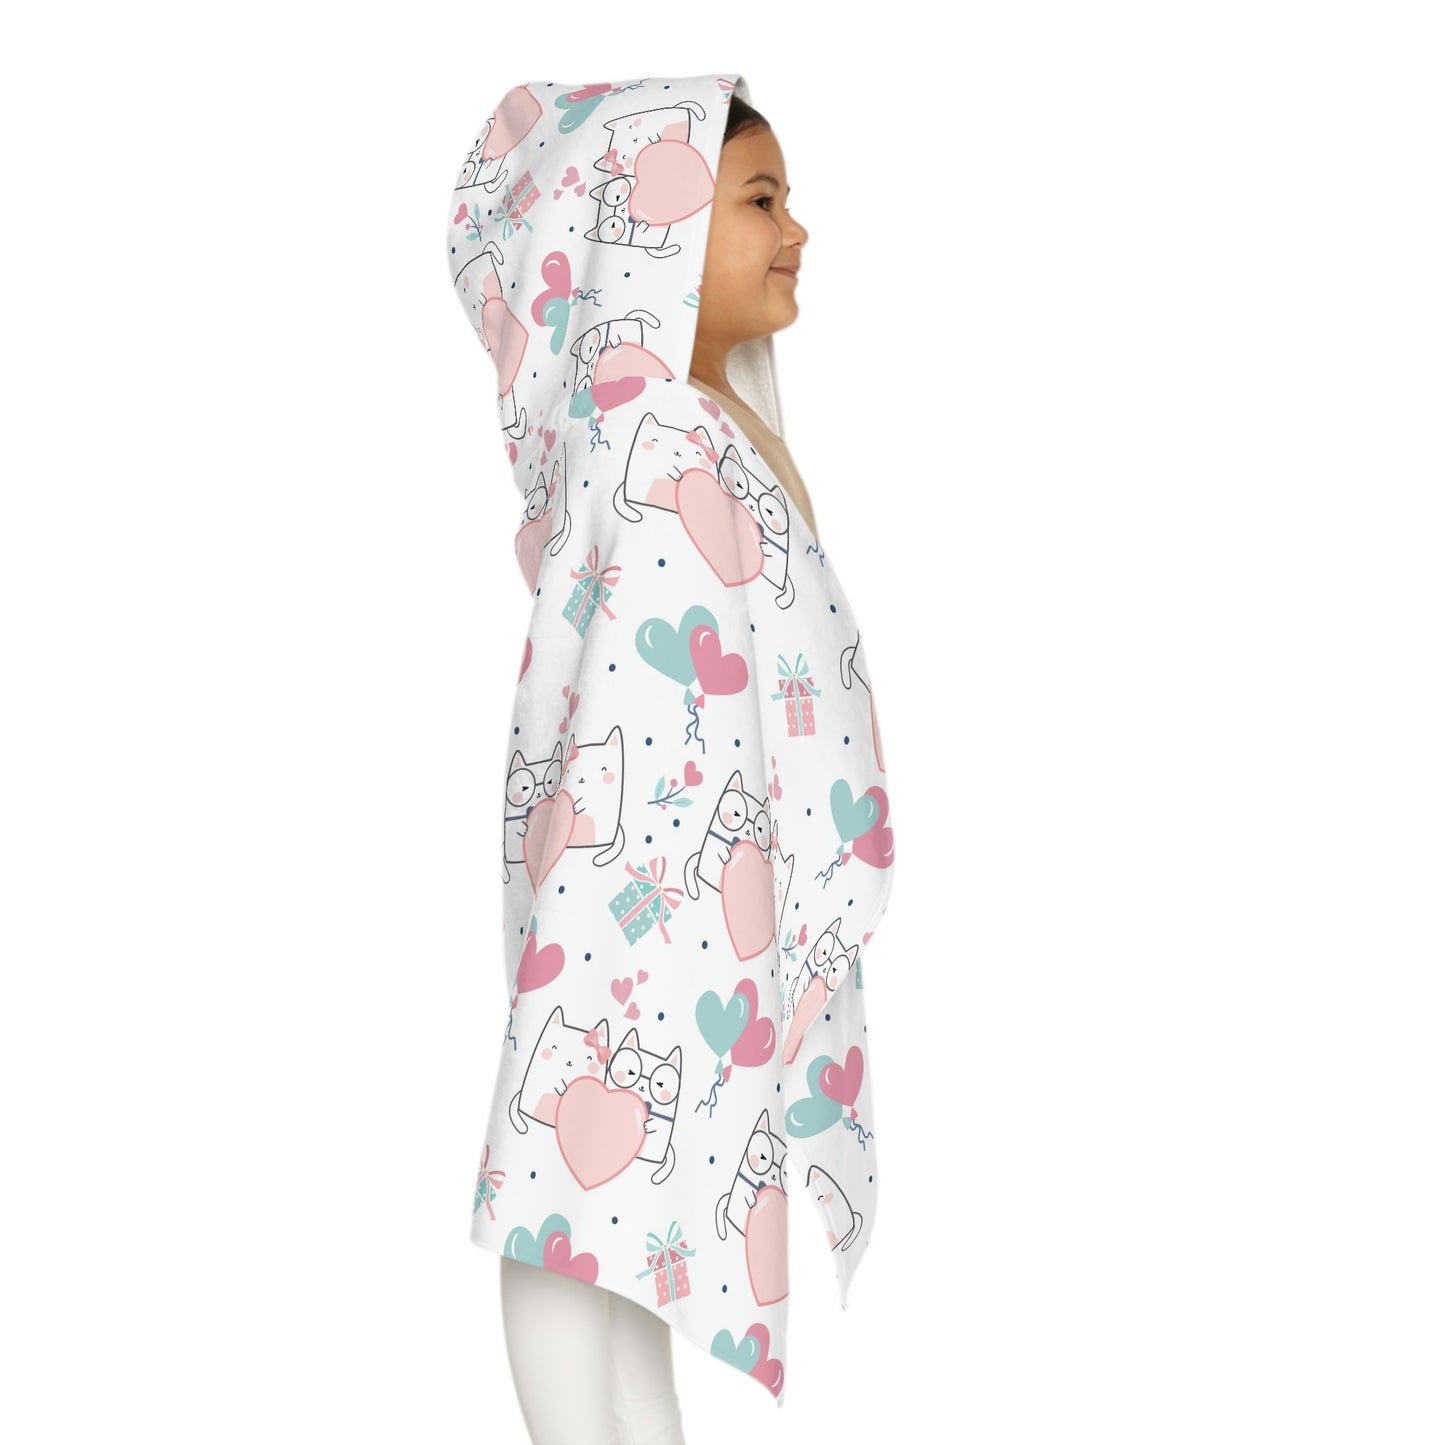 Kawaii Cats in Love Youth Hooded Towel